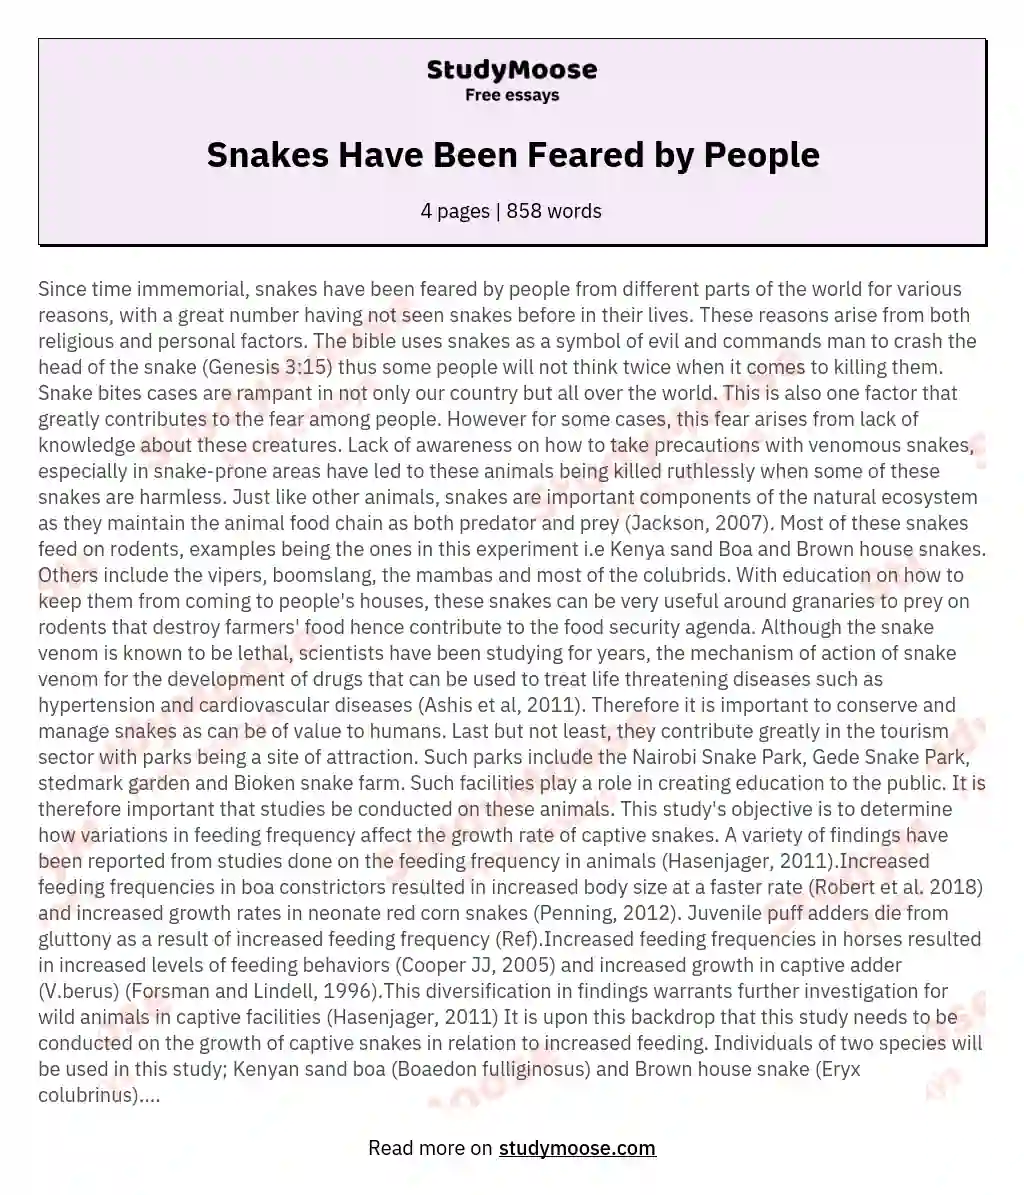 Snakes Have Been Feared by People essay